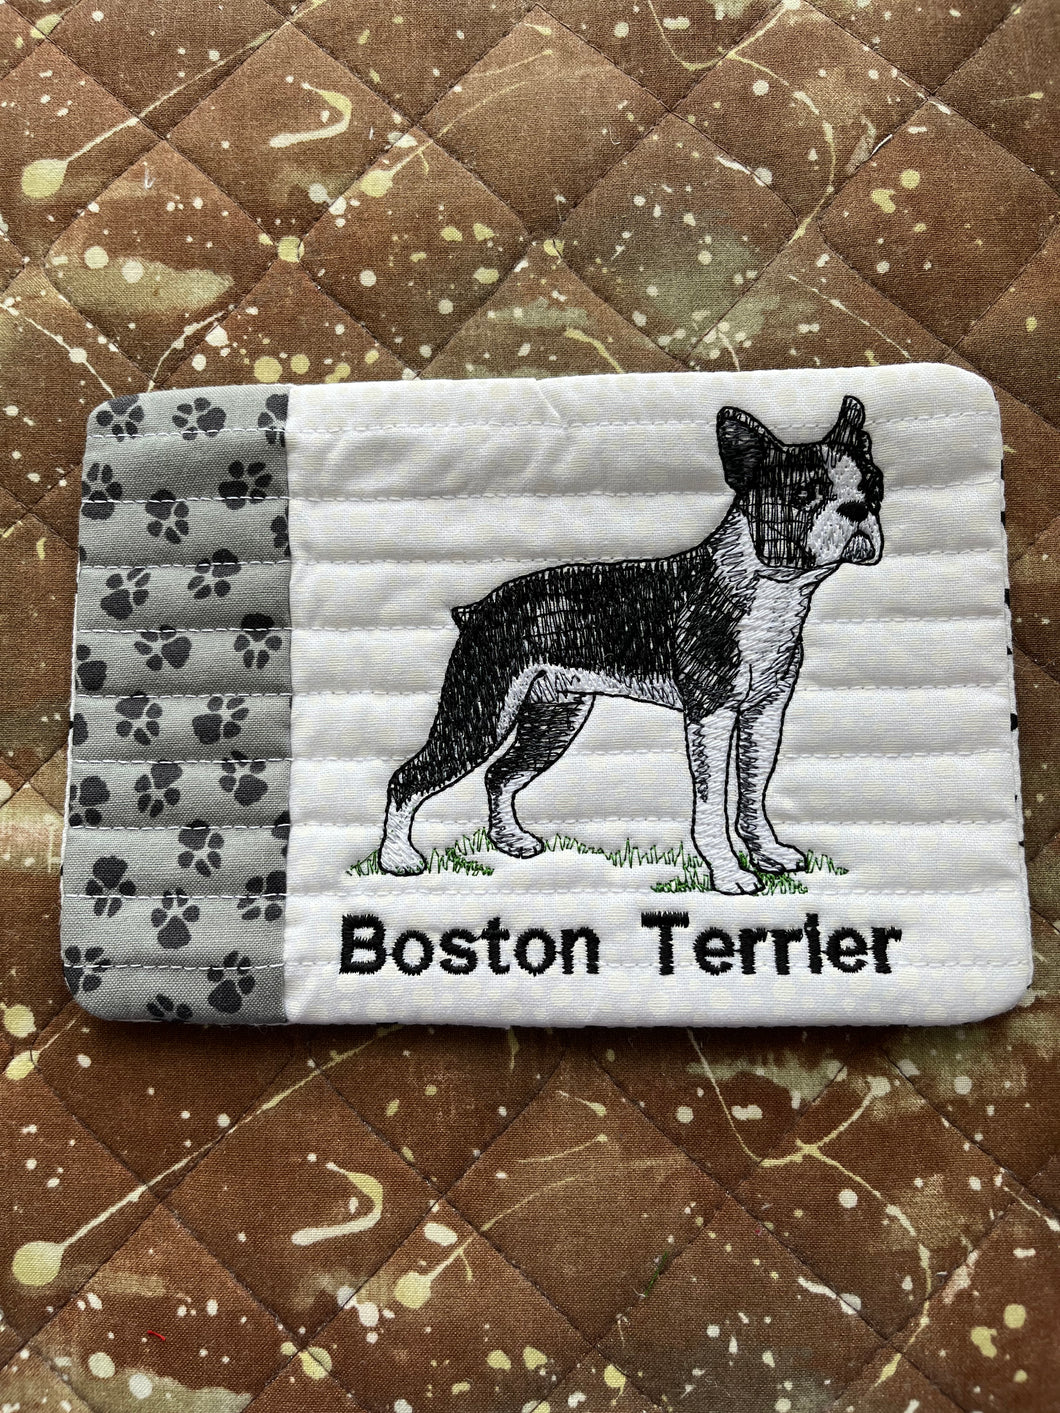 Is the Boston Terrier your favorite Dog?   You're going to love this!